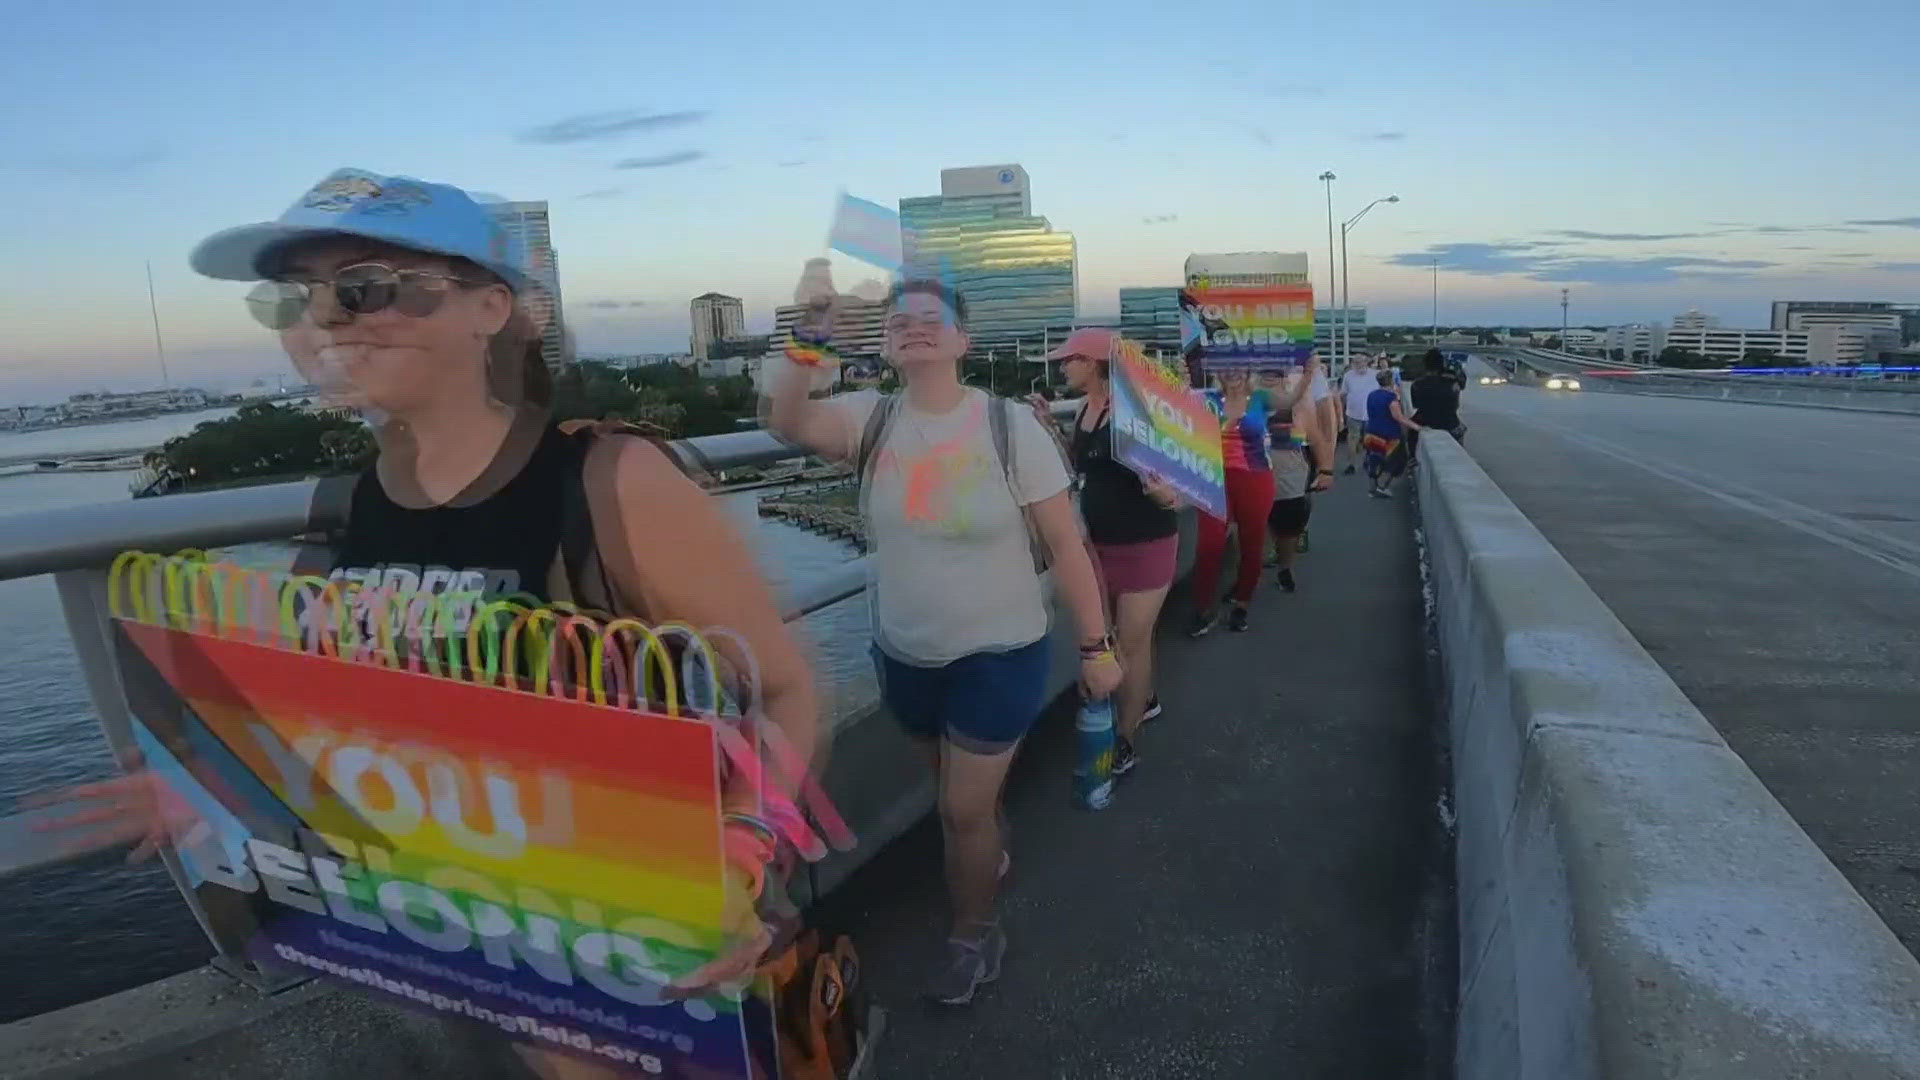 The event was in protest of the Florida Department of Transportation's decision to mandate all state bridges light up red, white and blue for "Freedom Summer."